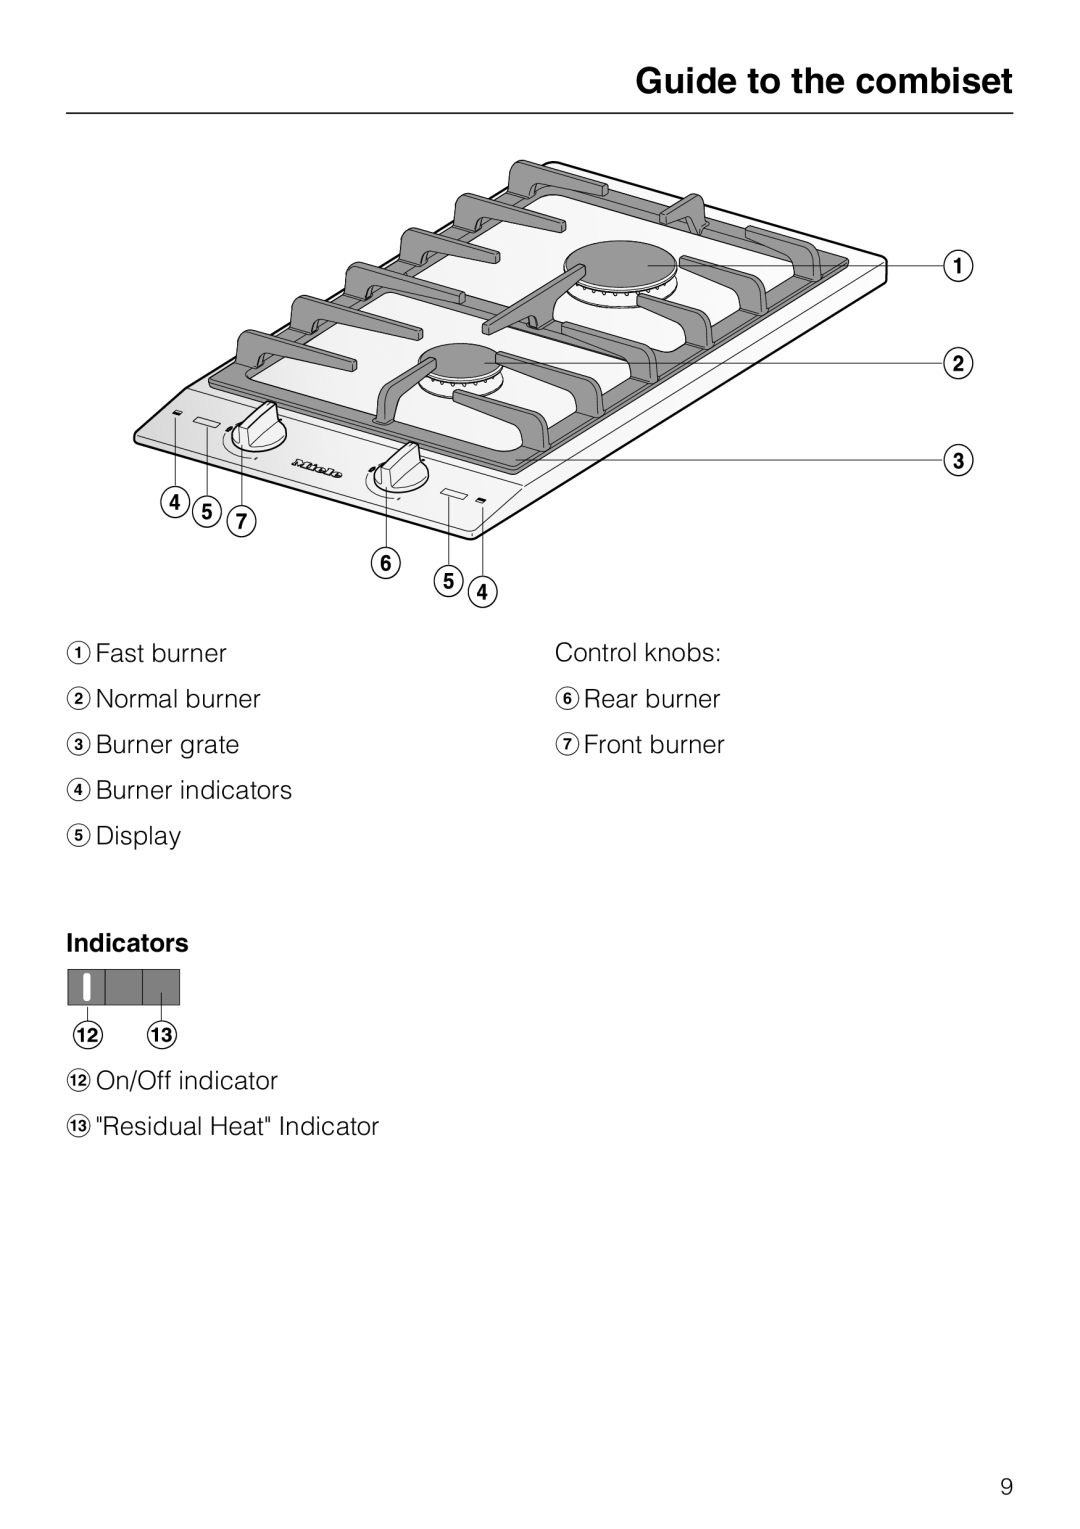 Miele CS 1012 installation instructions Guide to the combiset, Indicators 